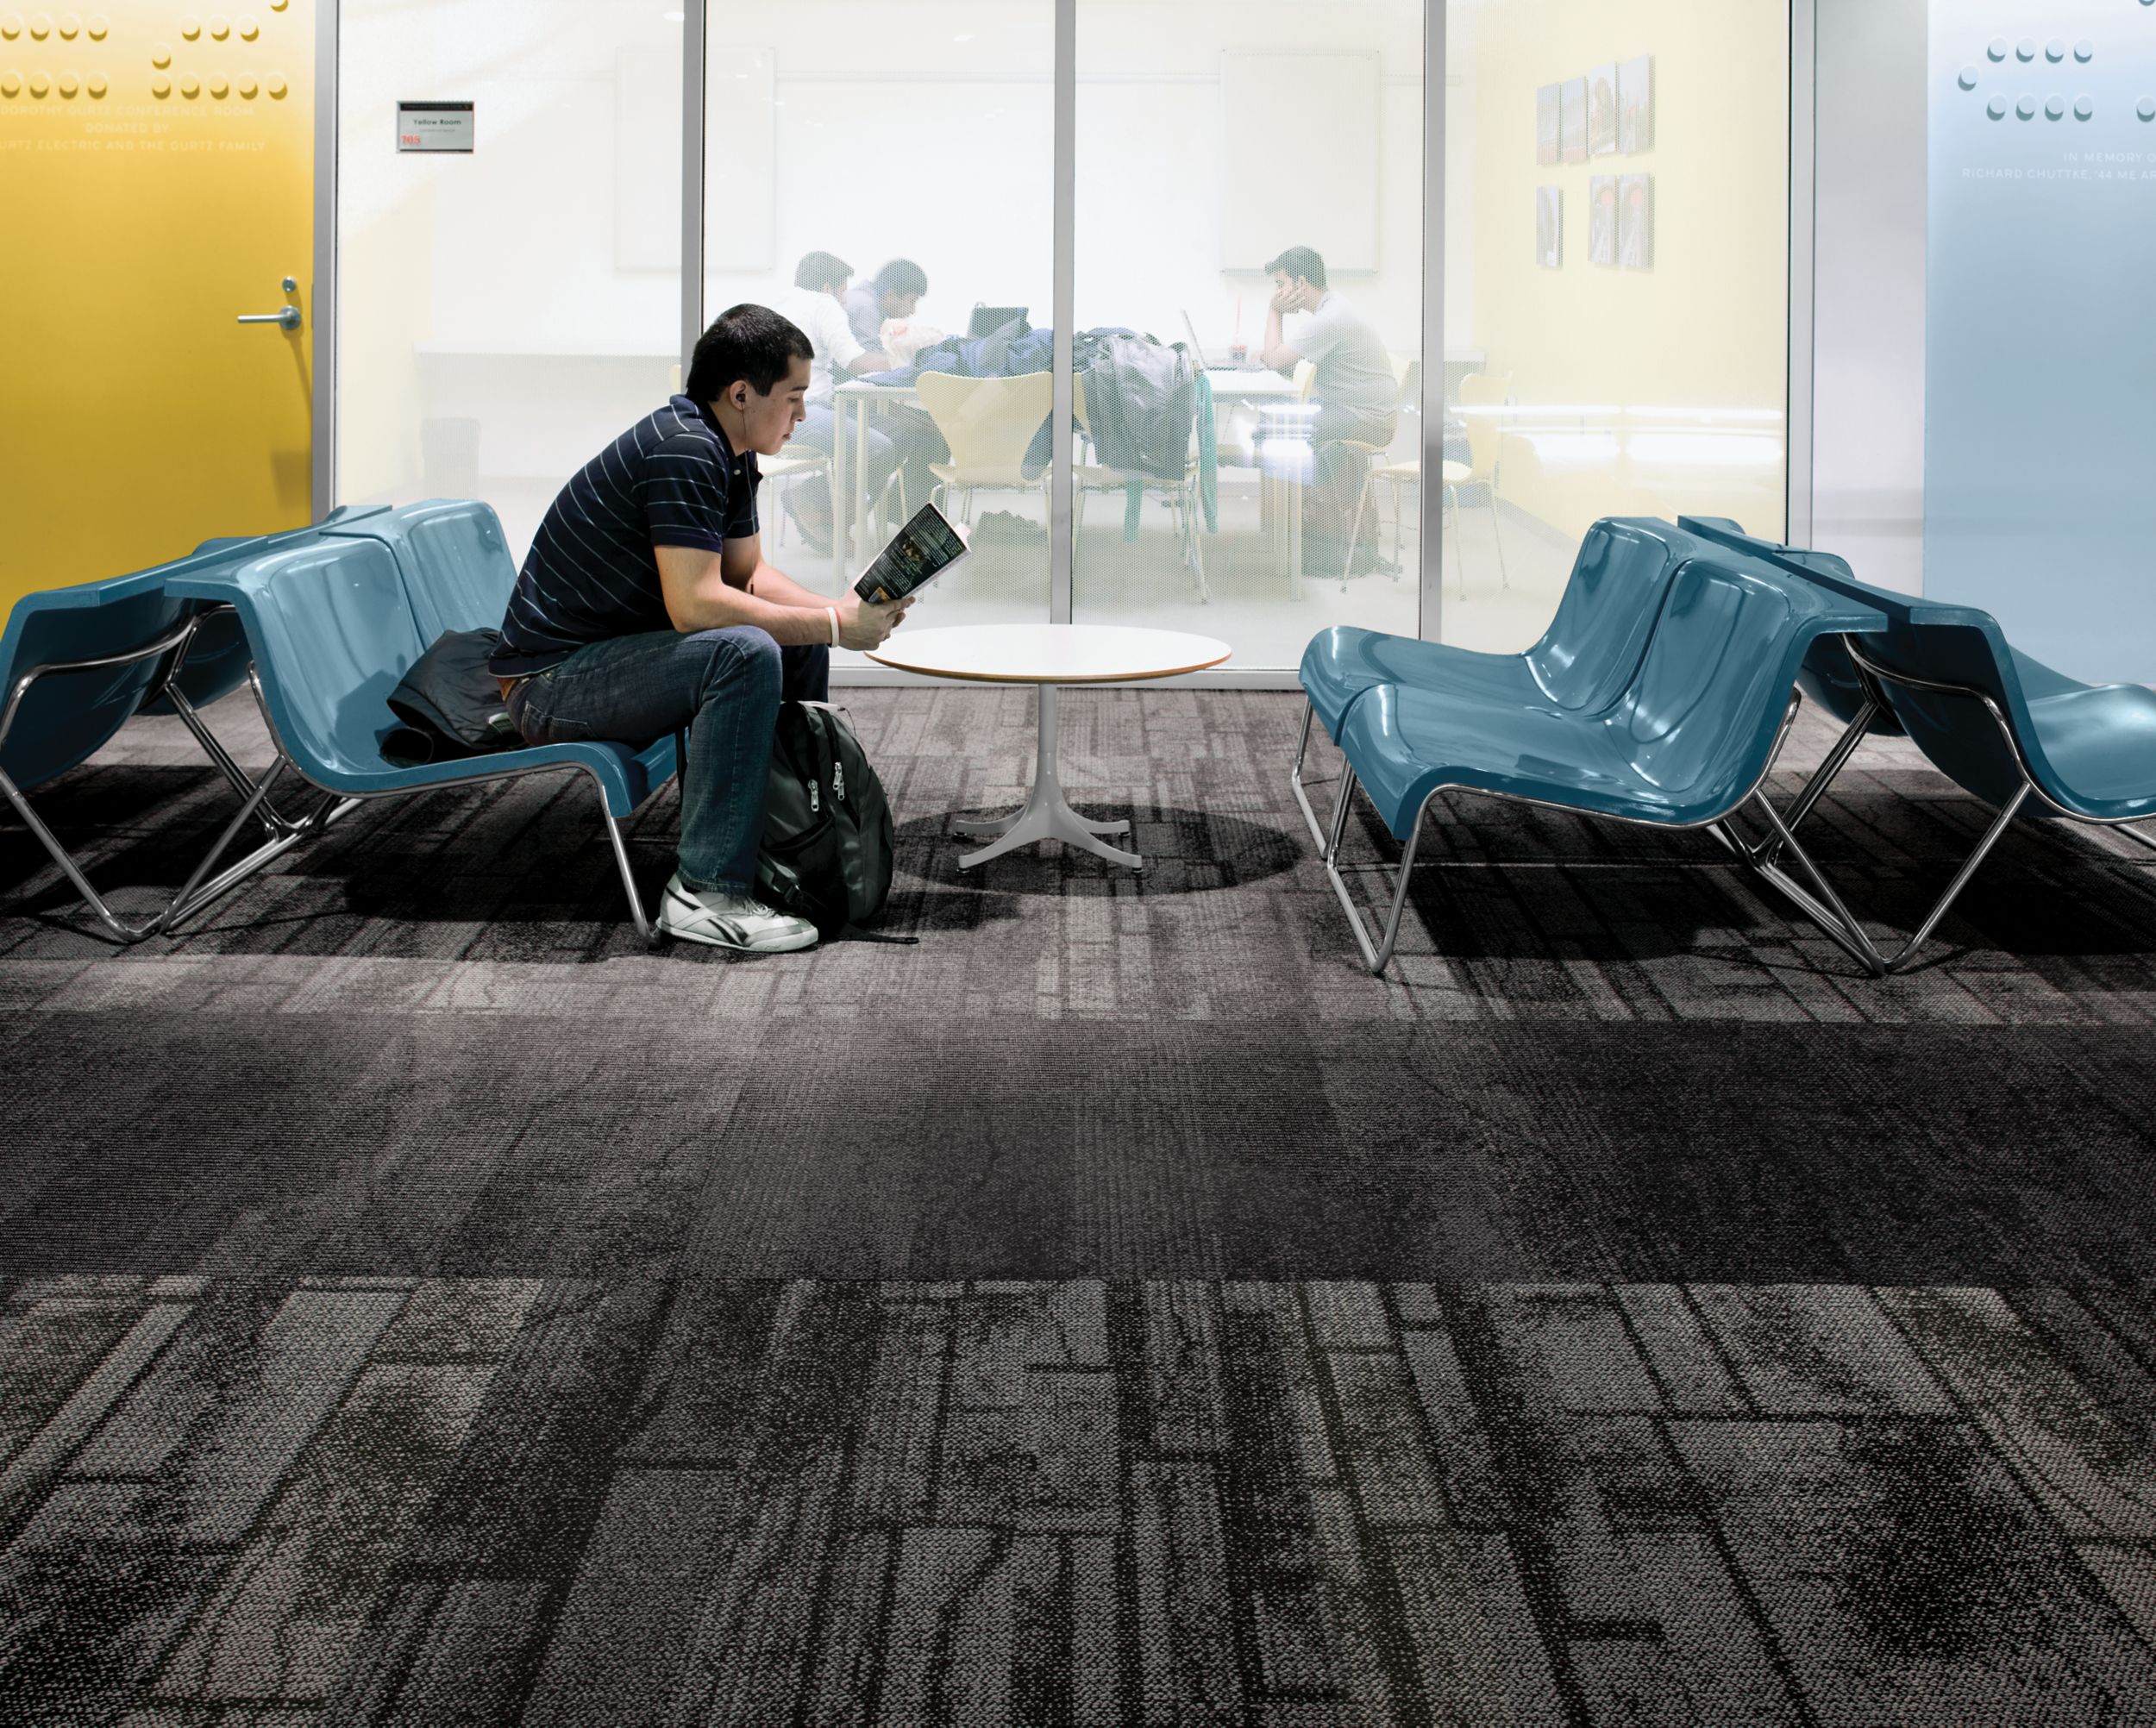 Interface Neighborhood Blocks and Neighborhood Smooth plank carpet tile in public education space with man reading a book on blue chair image number 10